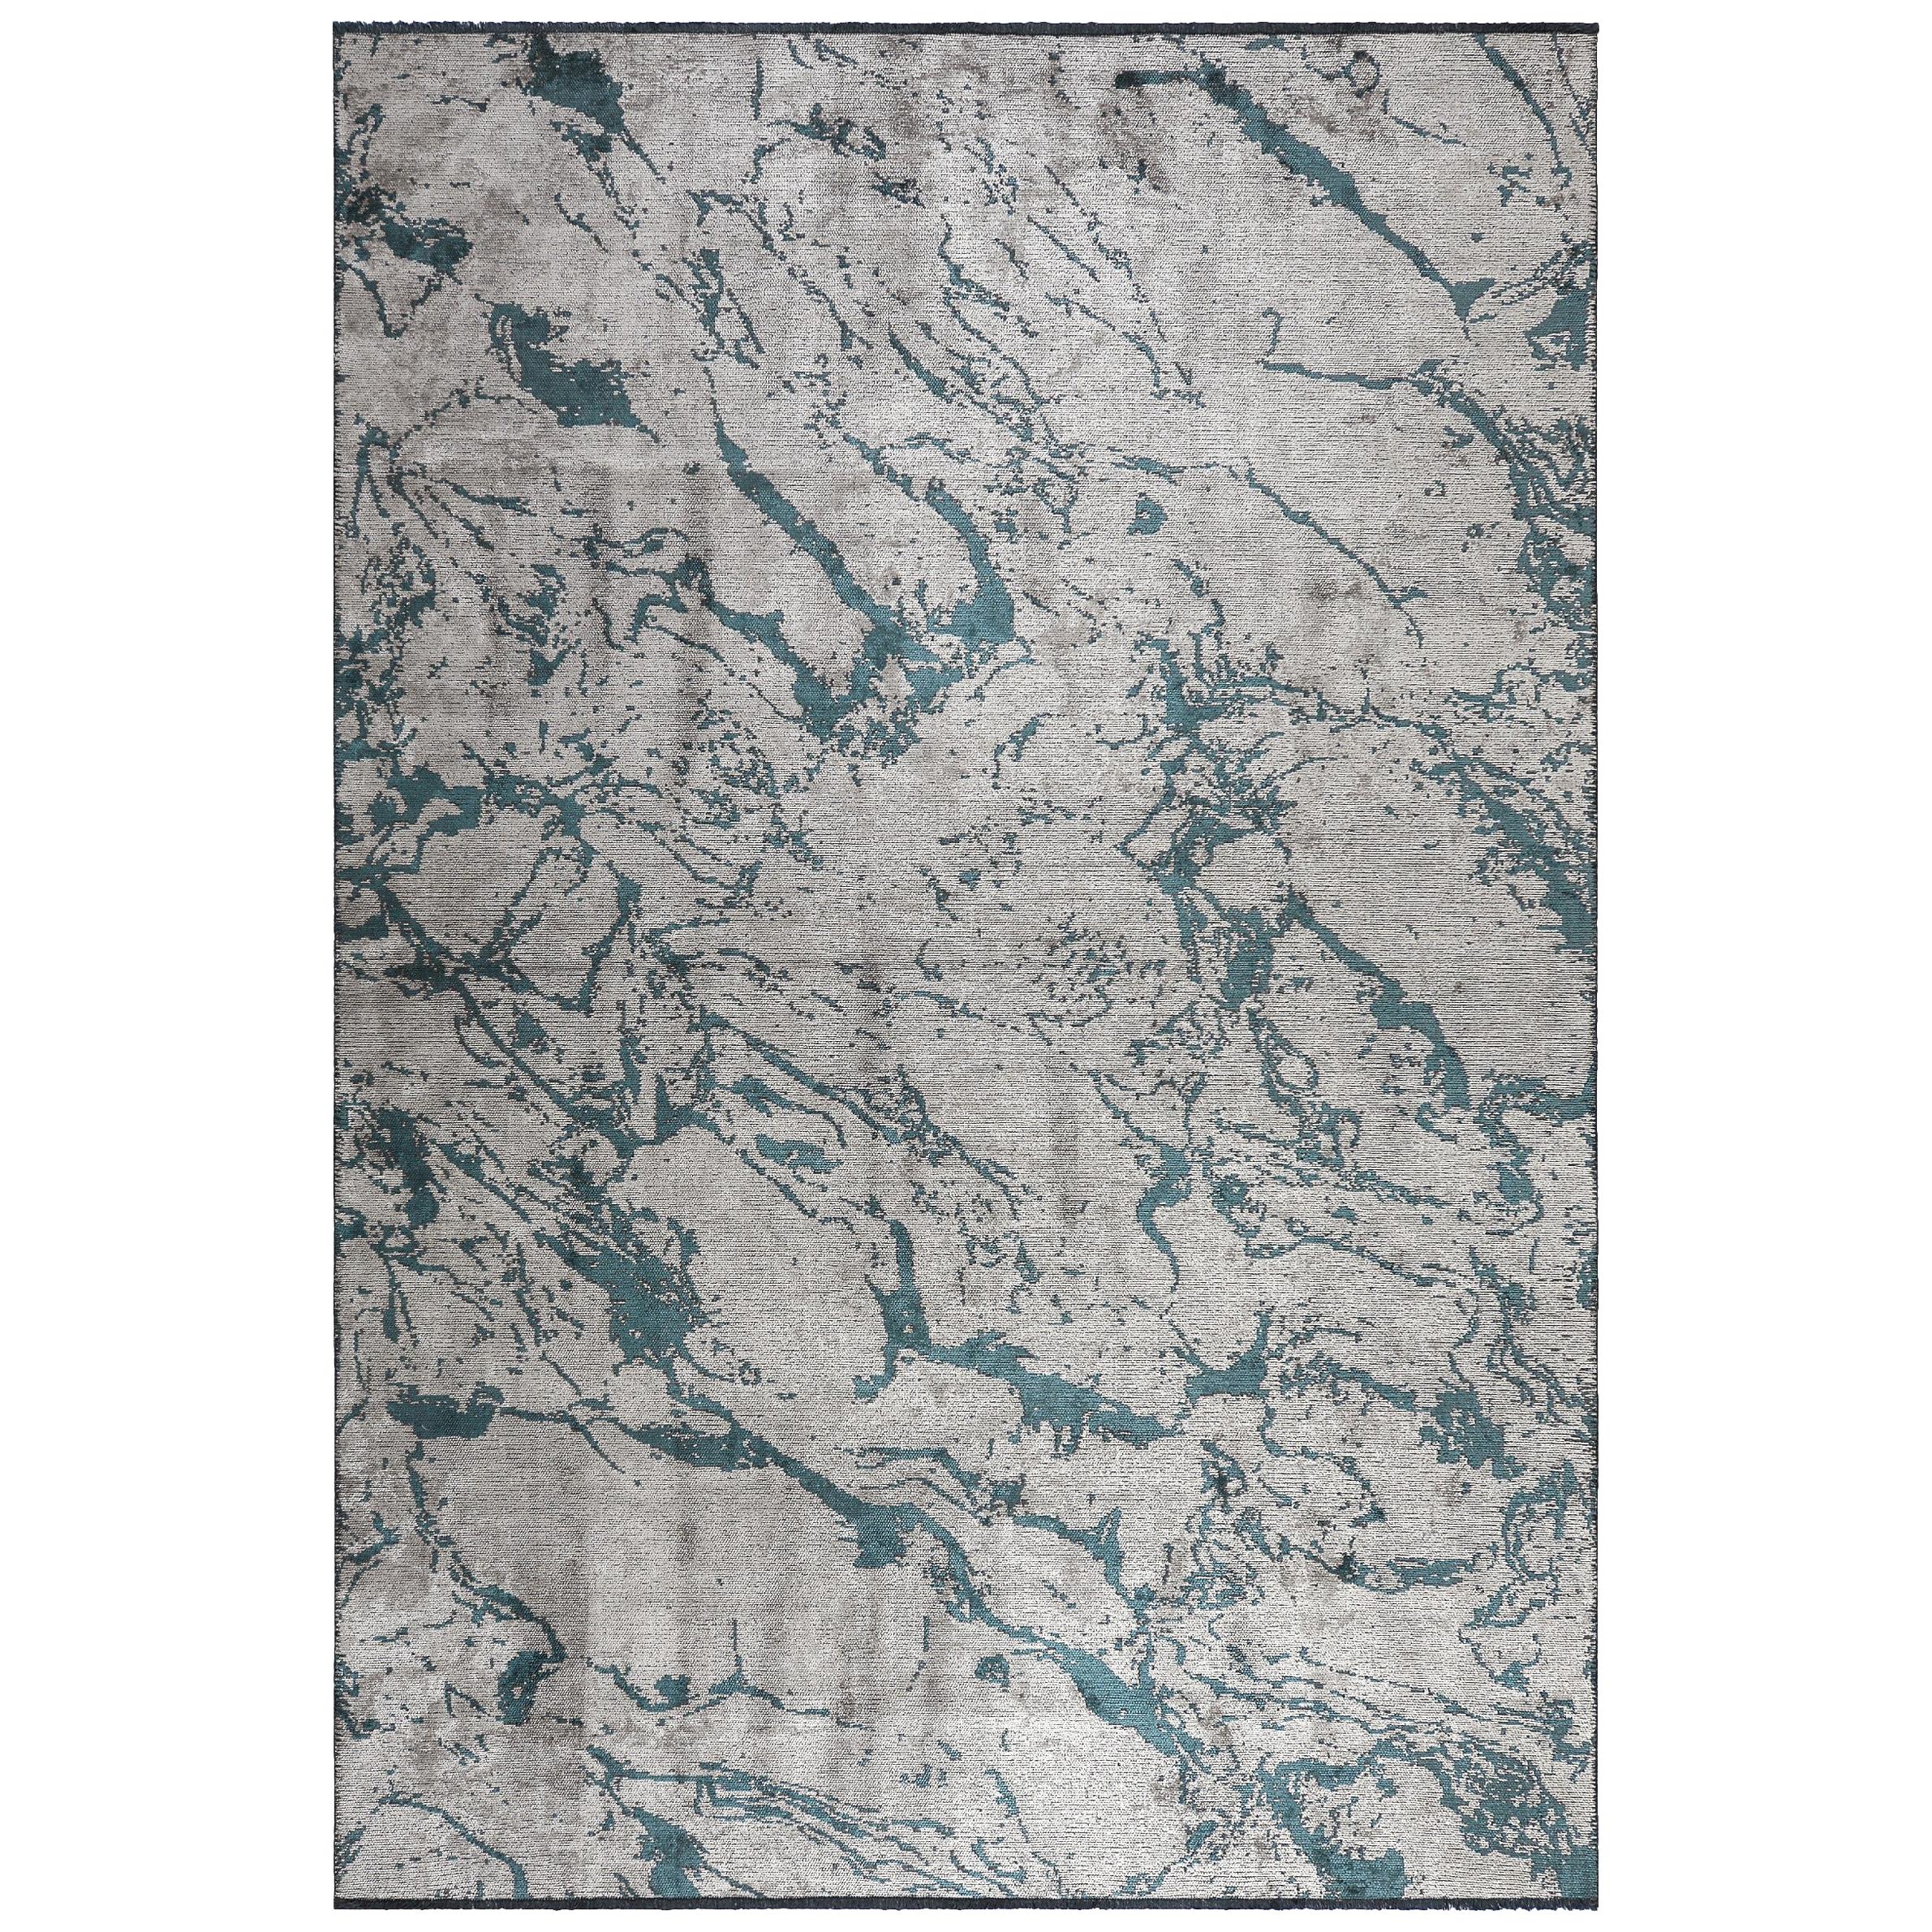 Modernist Silver Gray and Teal Abstract Marble Design Soft Semi-Plush Rug